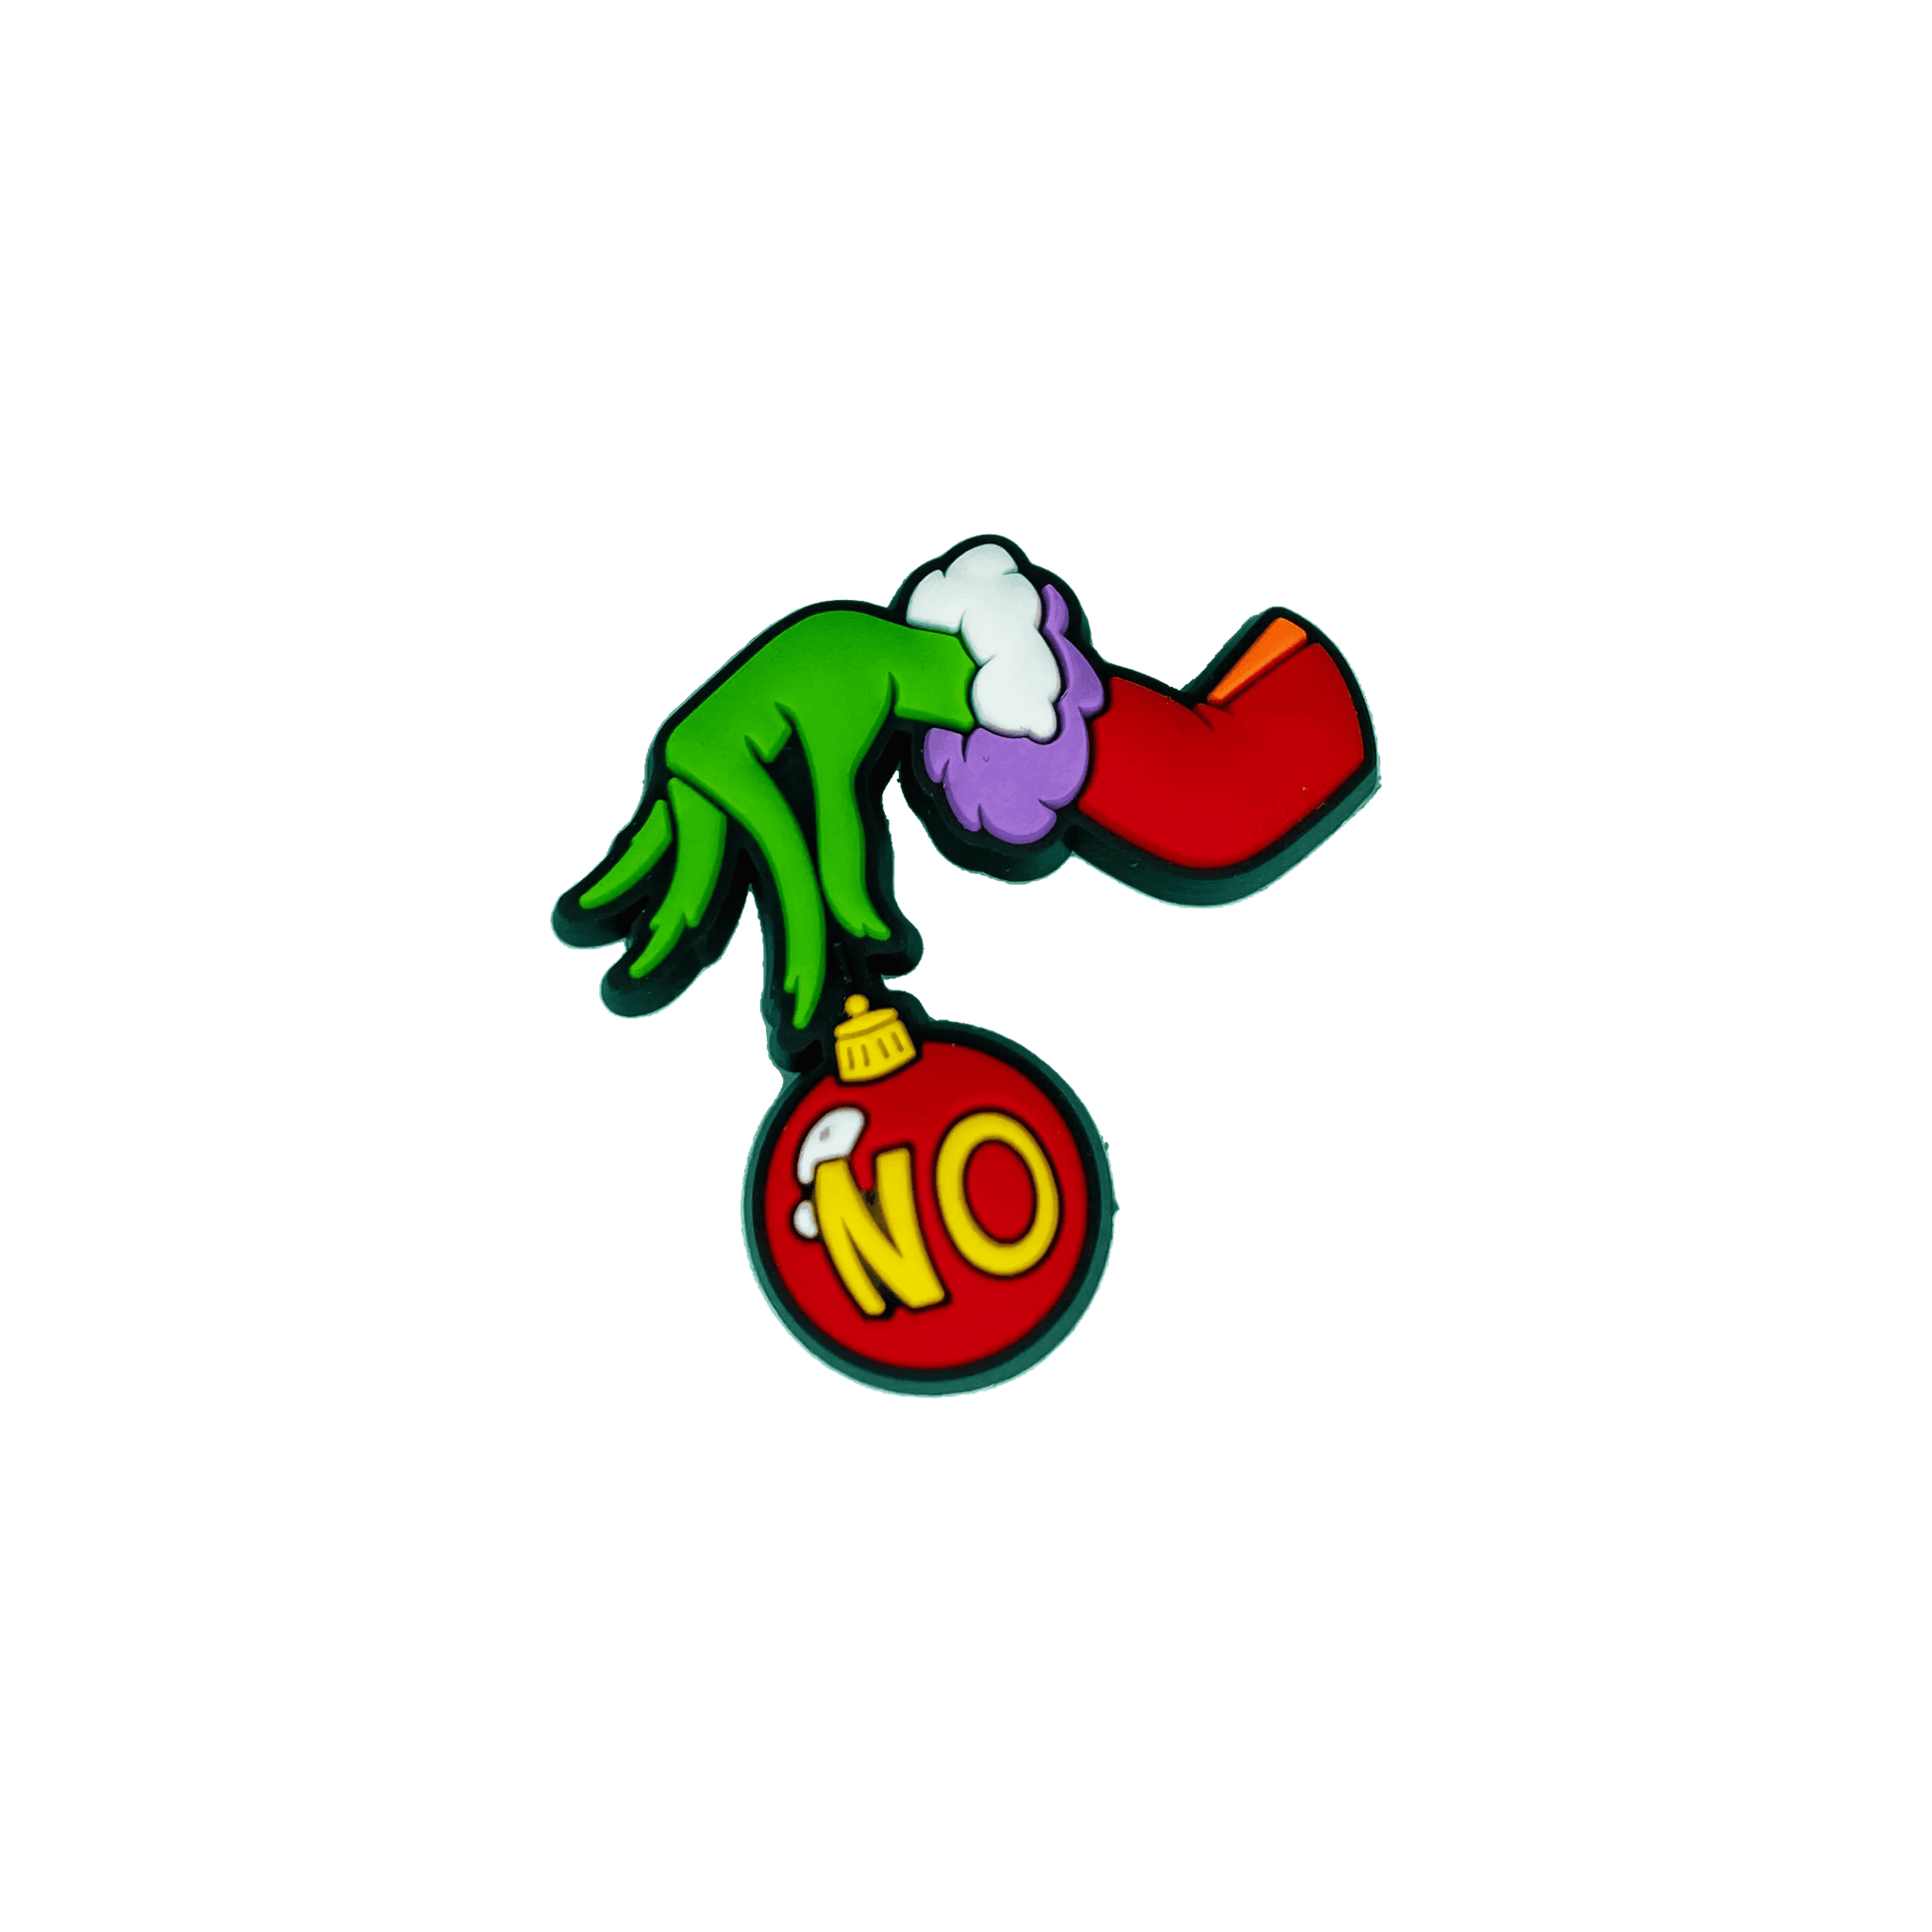 The Grinch, No Ornament Charm Charms By Prince